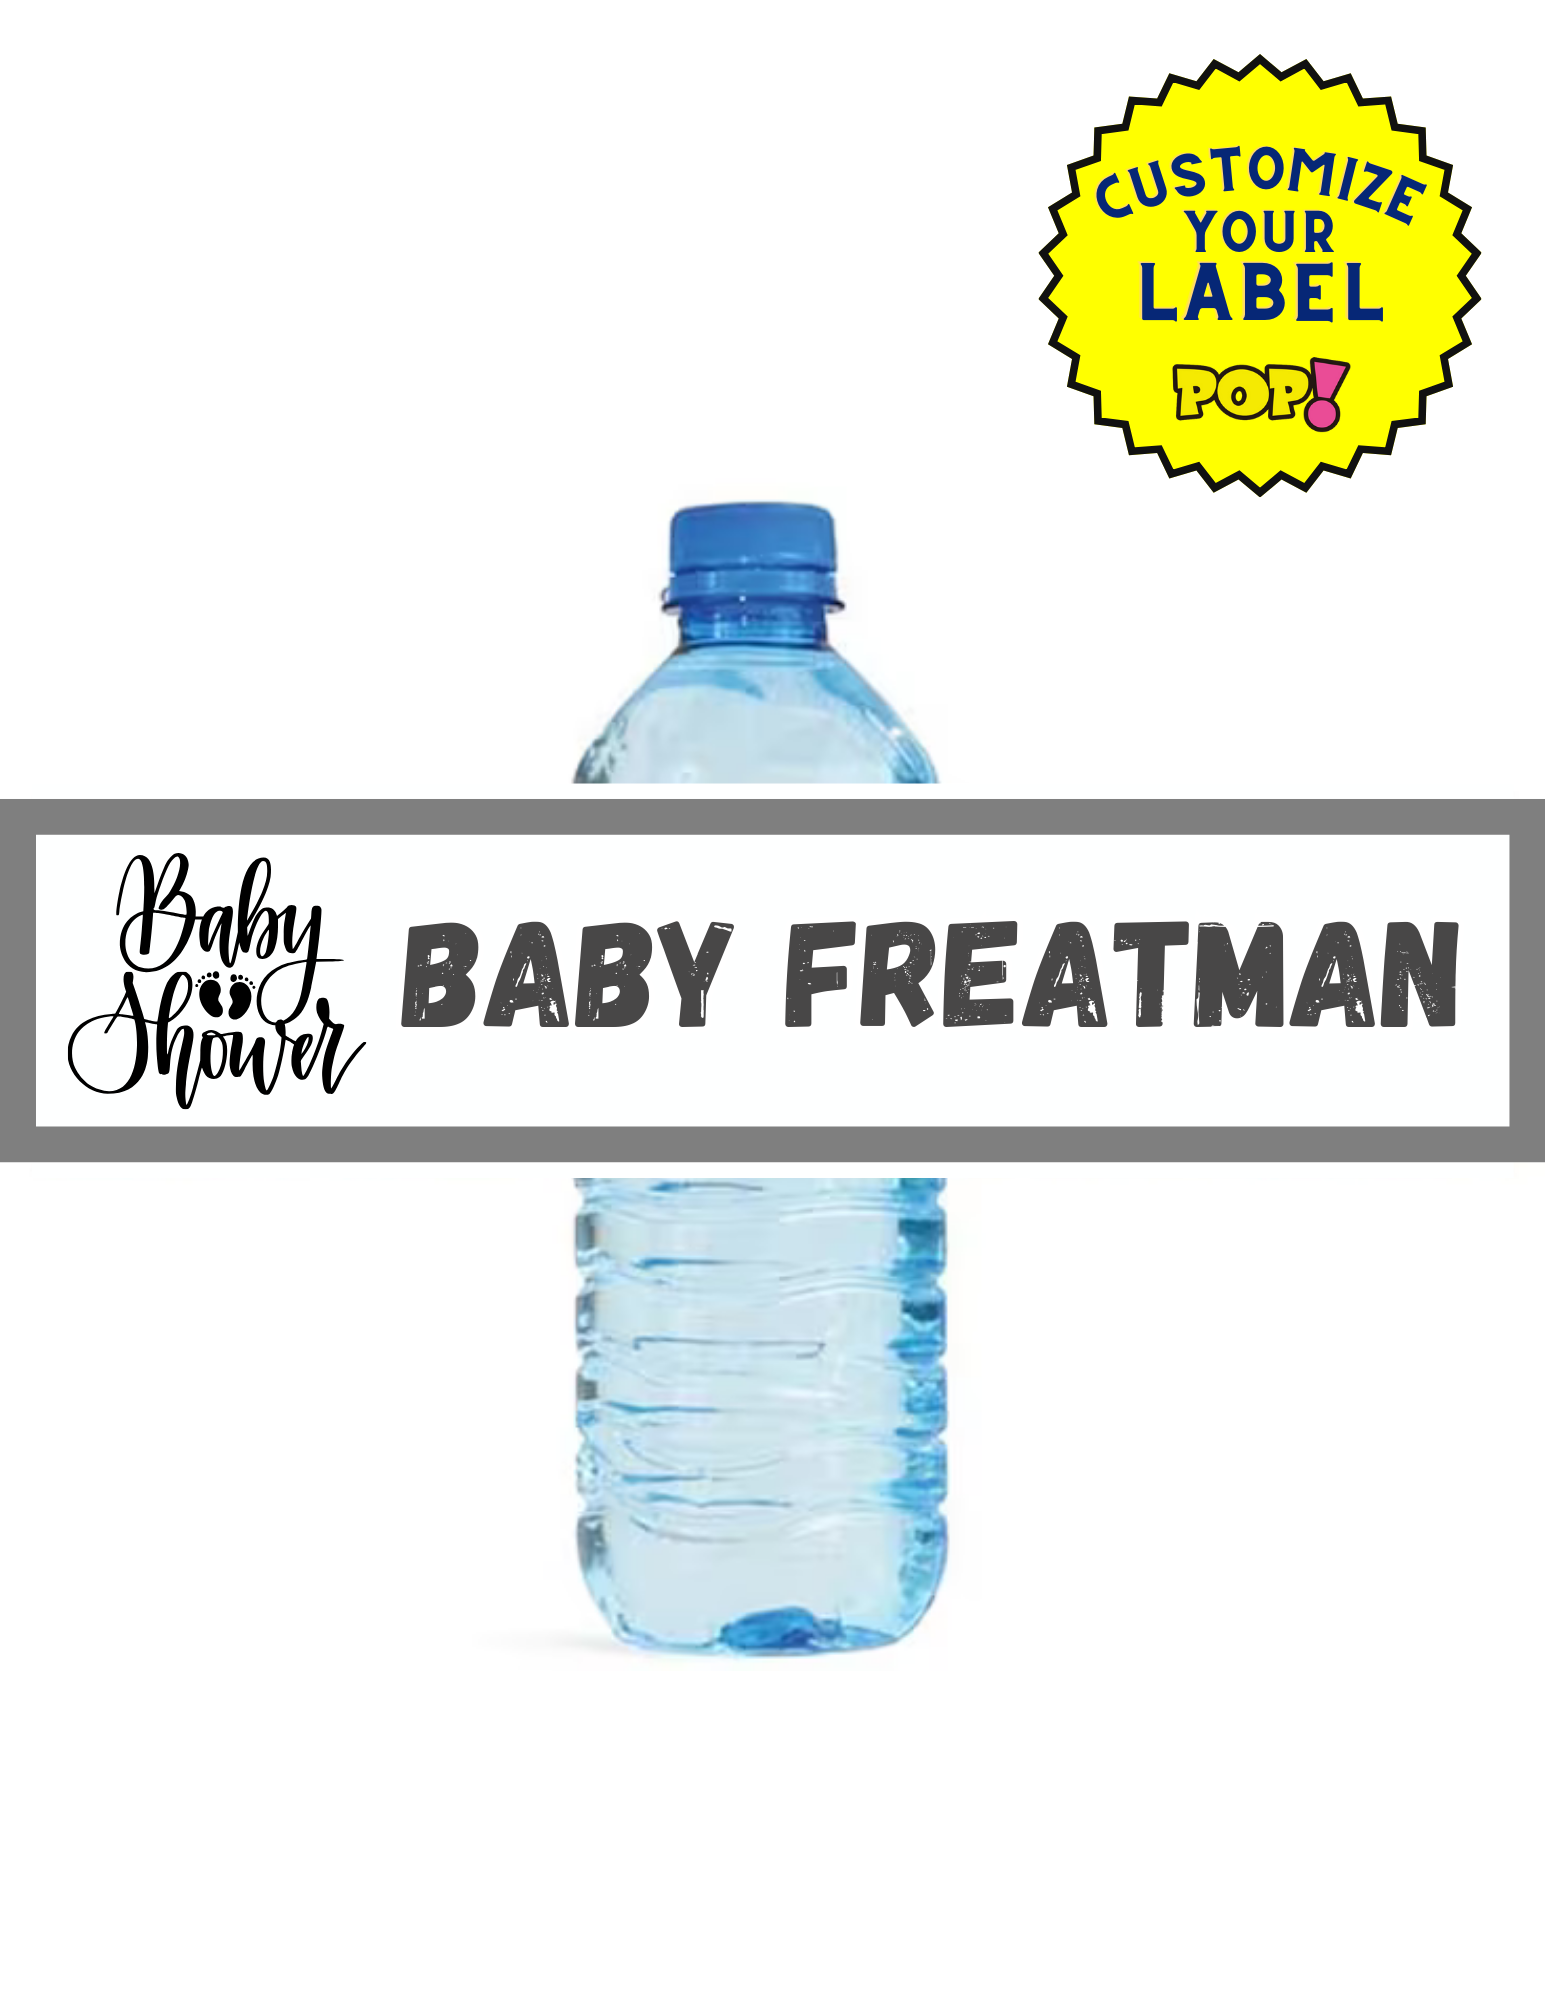 Custom Water Bottle Labels - Customize Your Design - POPPartyballoons